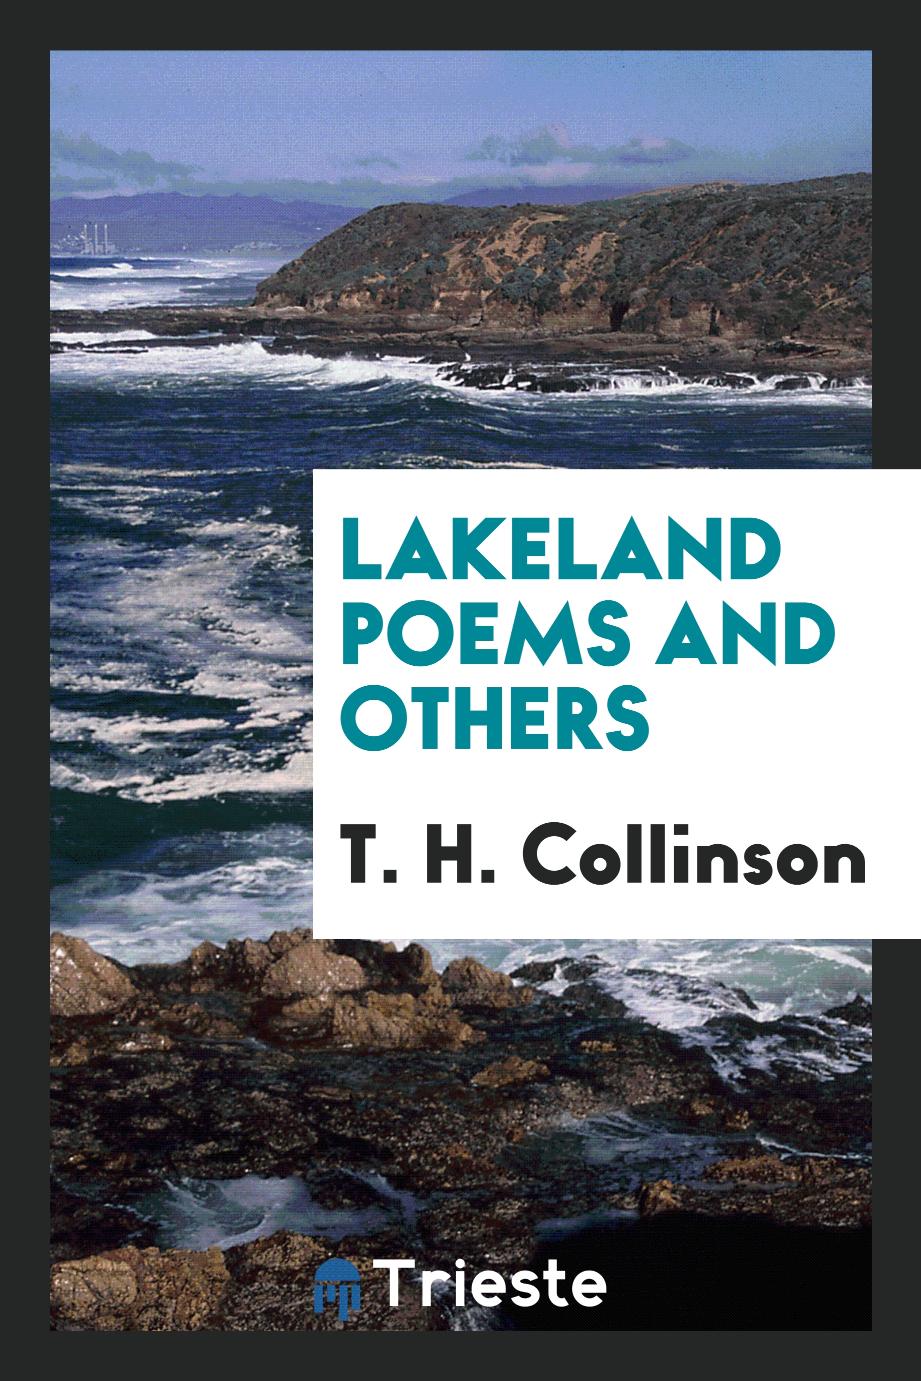 Lakeland poems and others